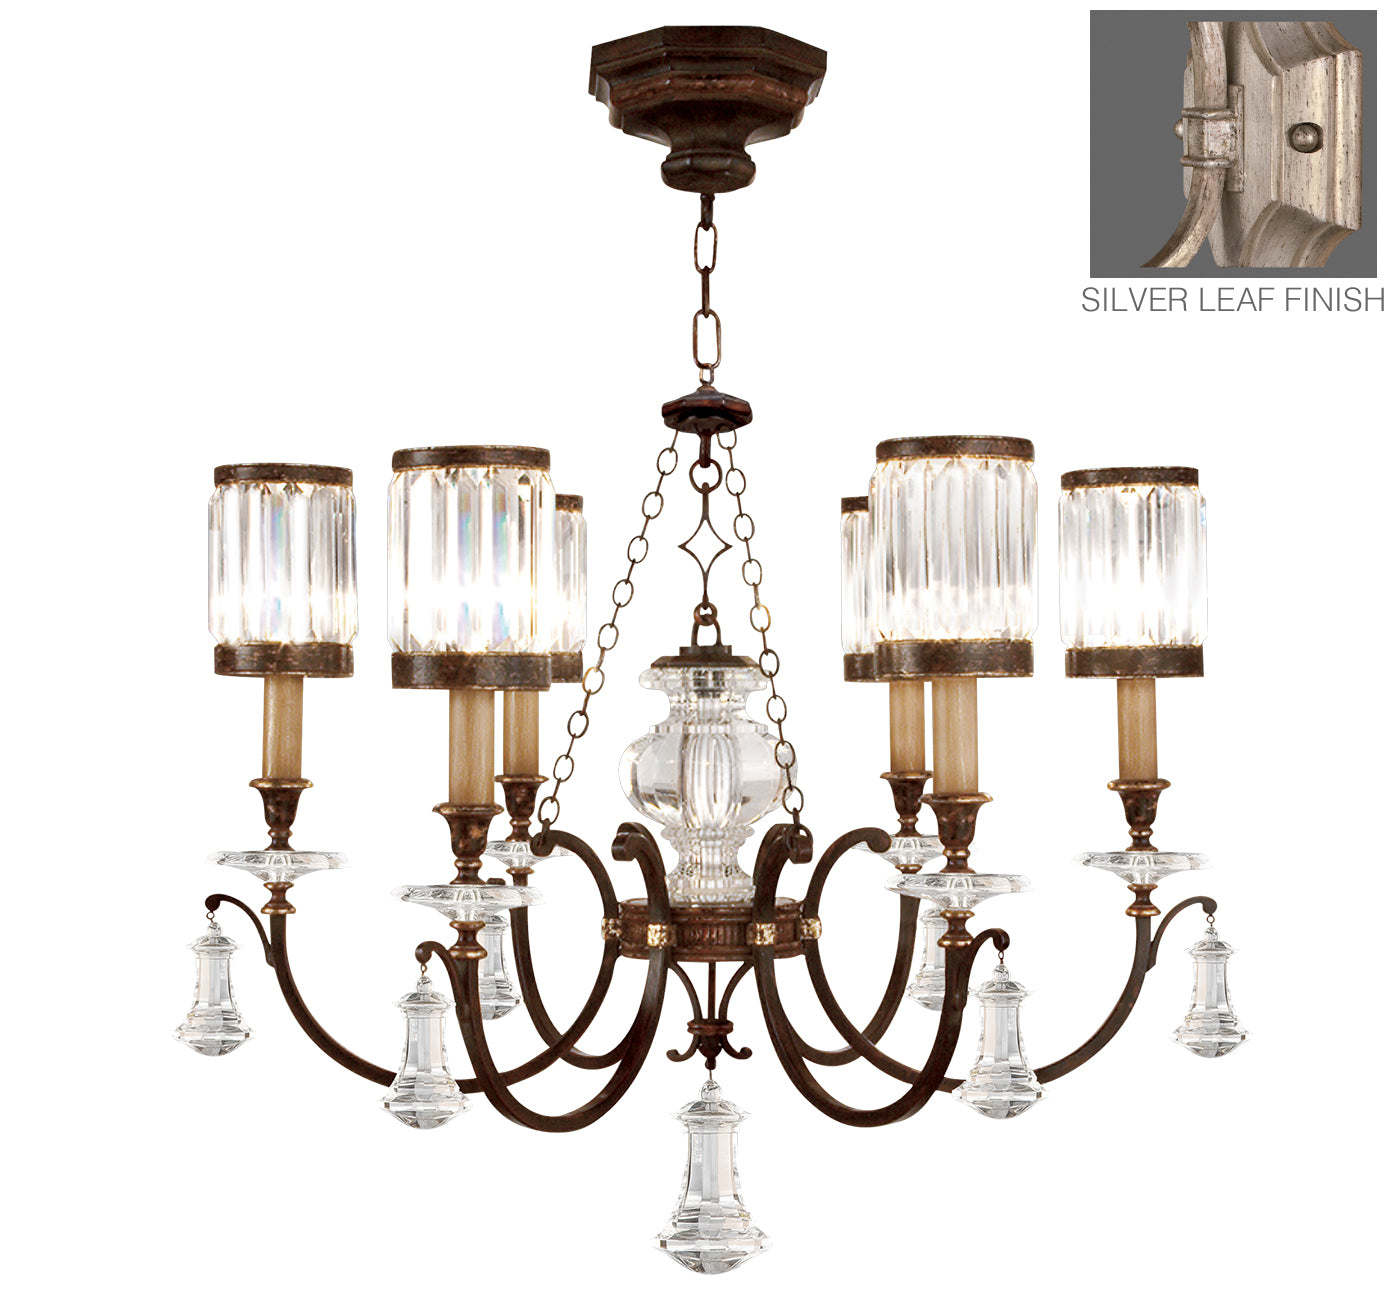 Fine Art Handcrafted Lighting Eaton Place Chandelier Chandeliers Fine Art Handcrafted Lighting Silver 32 x 28 